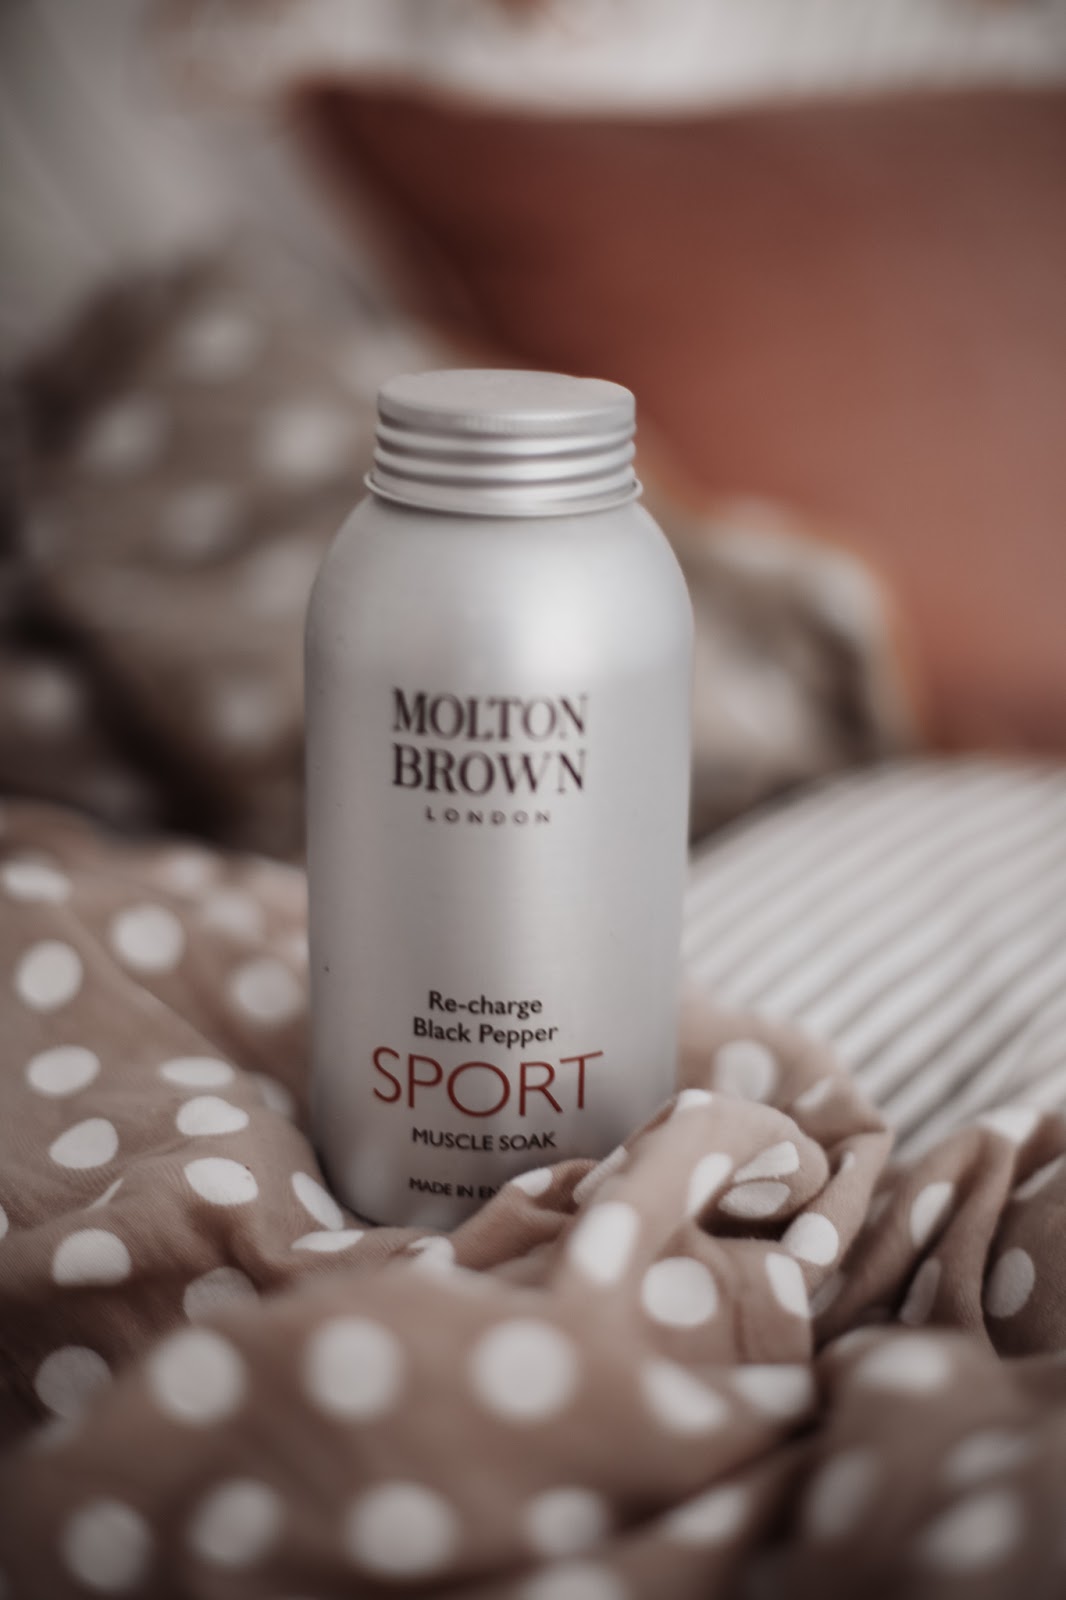 Molton Brown Re-charge Black Pepper Sport Muscle Soak 